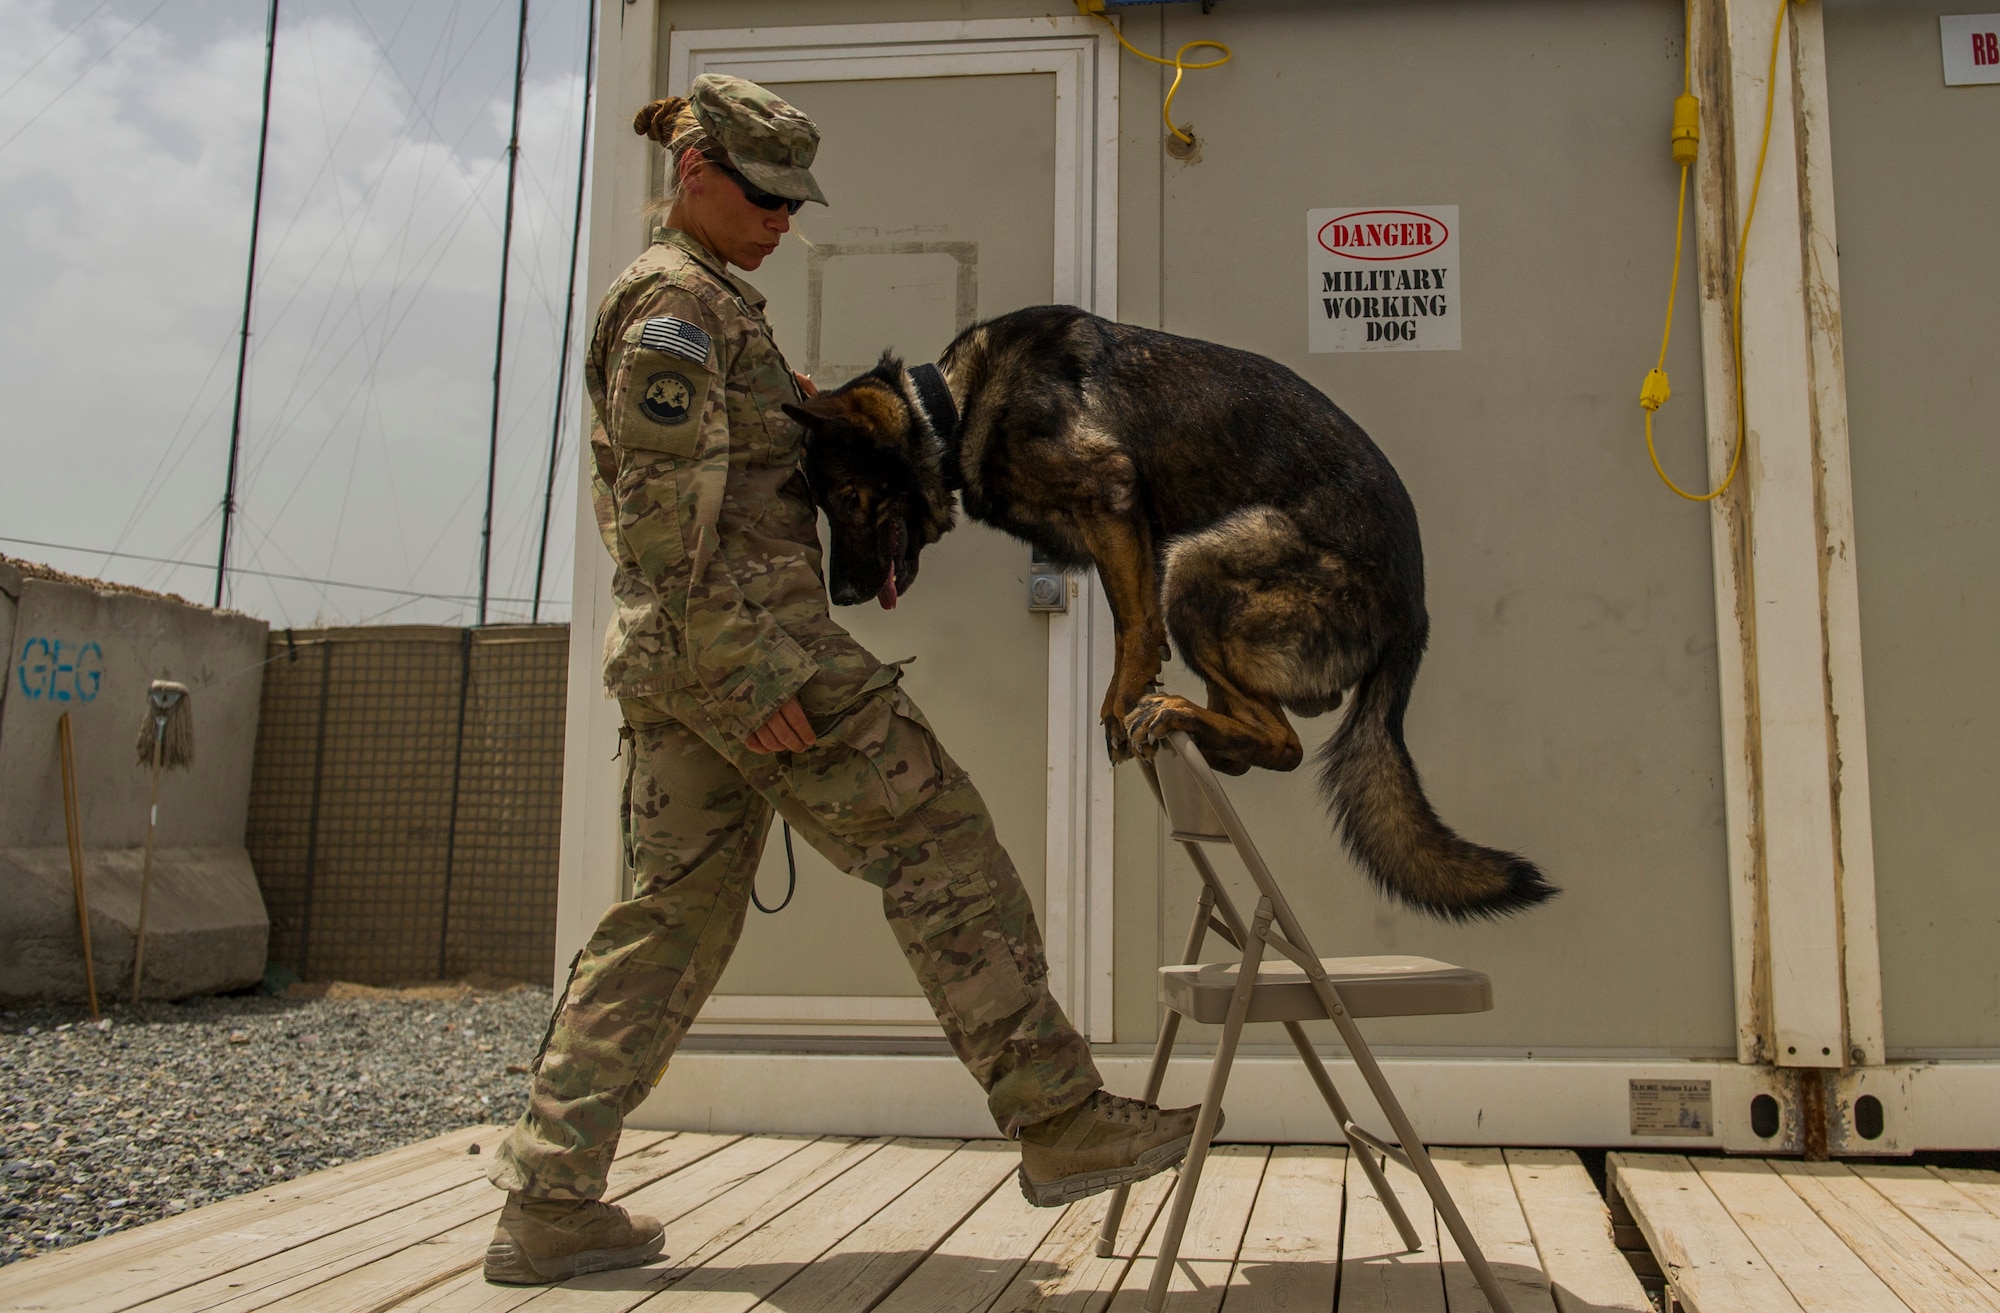 U.S. Air Force Staff Sgt. Jessie Johnson, 3rd Infantry Division military working dog handler, practices placement training with her dog, Chrach, at Forward Operation Base Pasab, Afghanistan, April 24, 2013,. Chrach is trained to detect the odor of explosives. Johnson, a native of Reading, Pa., has been a MWD handler for four years and is deployed from Luke Air Force Base, Ariz. (U.S. Air Force photo/Staff Sgt. Marleah Miller)